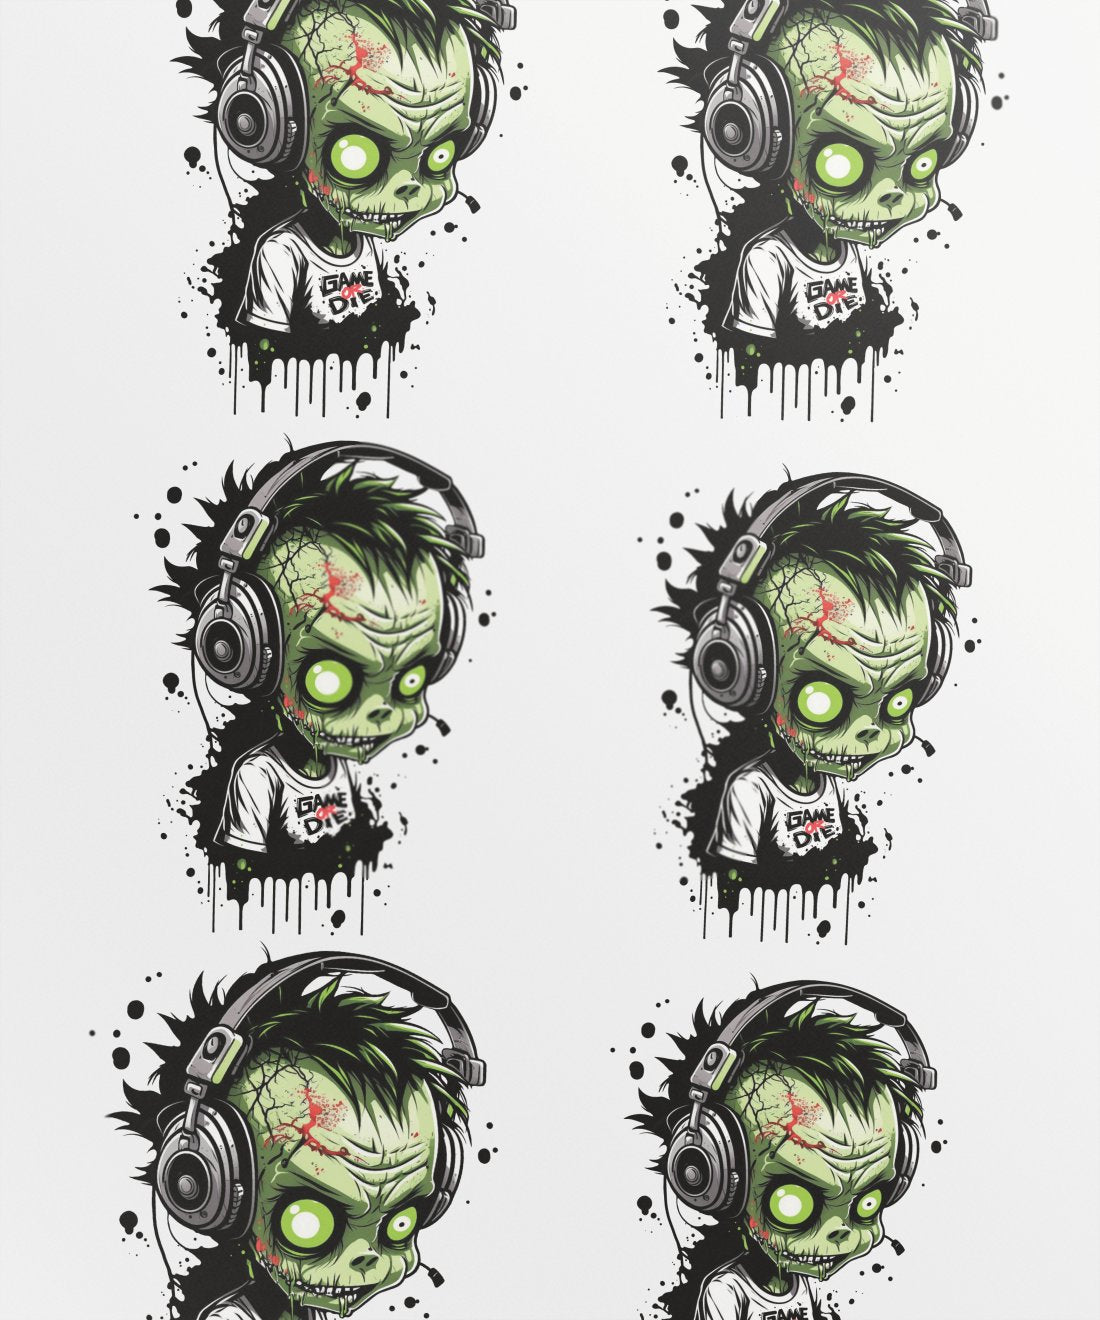 gamer-zombie-with-image1